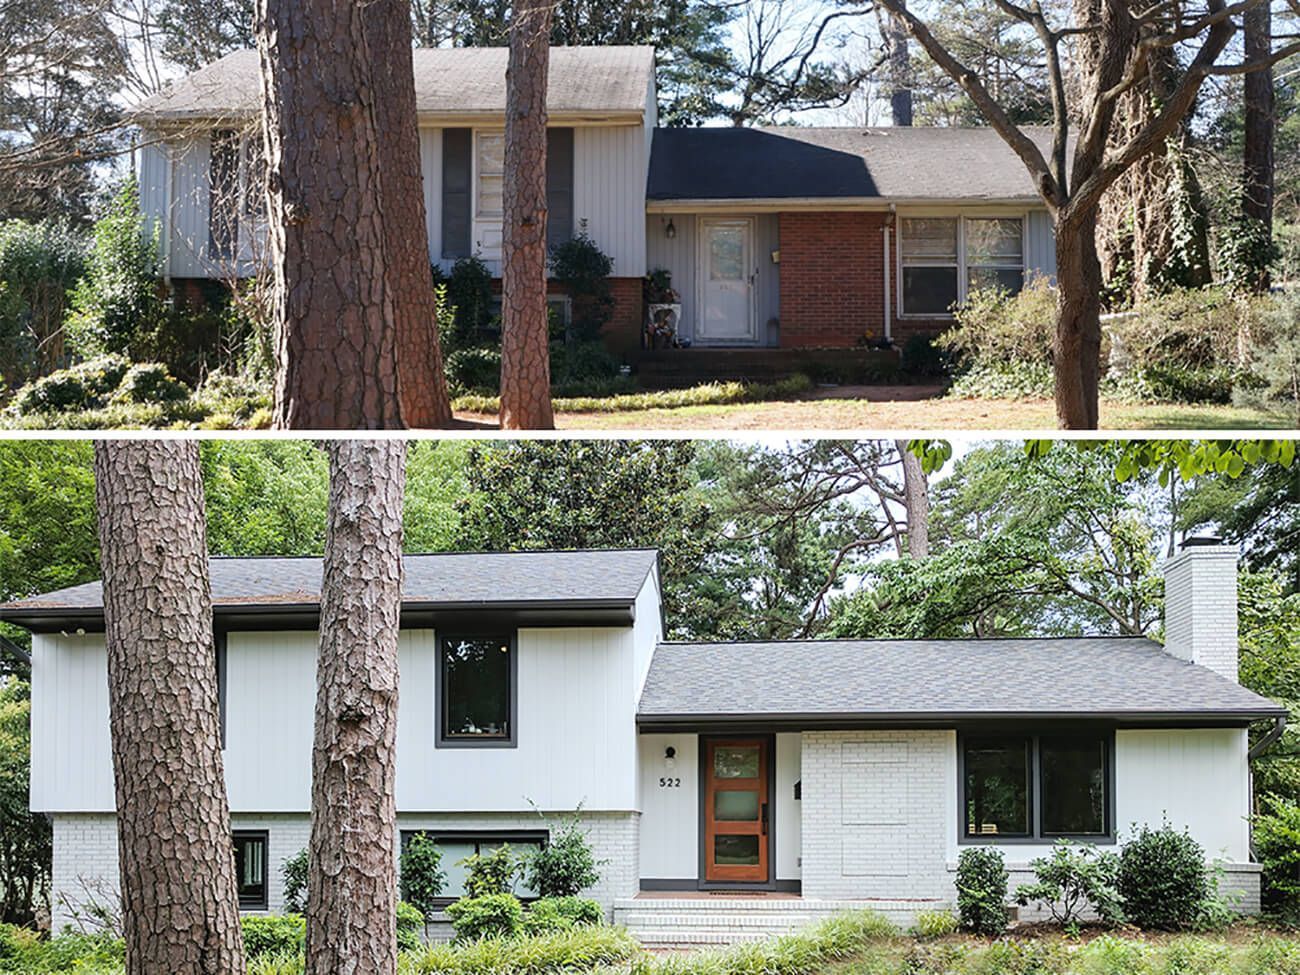 a before and after picture of a house surrounded by trees